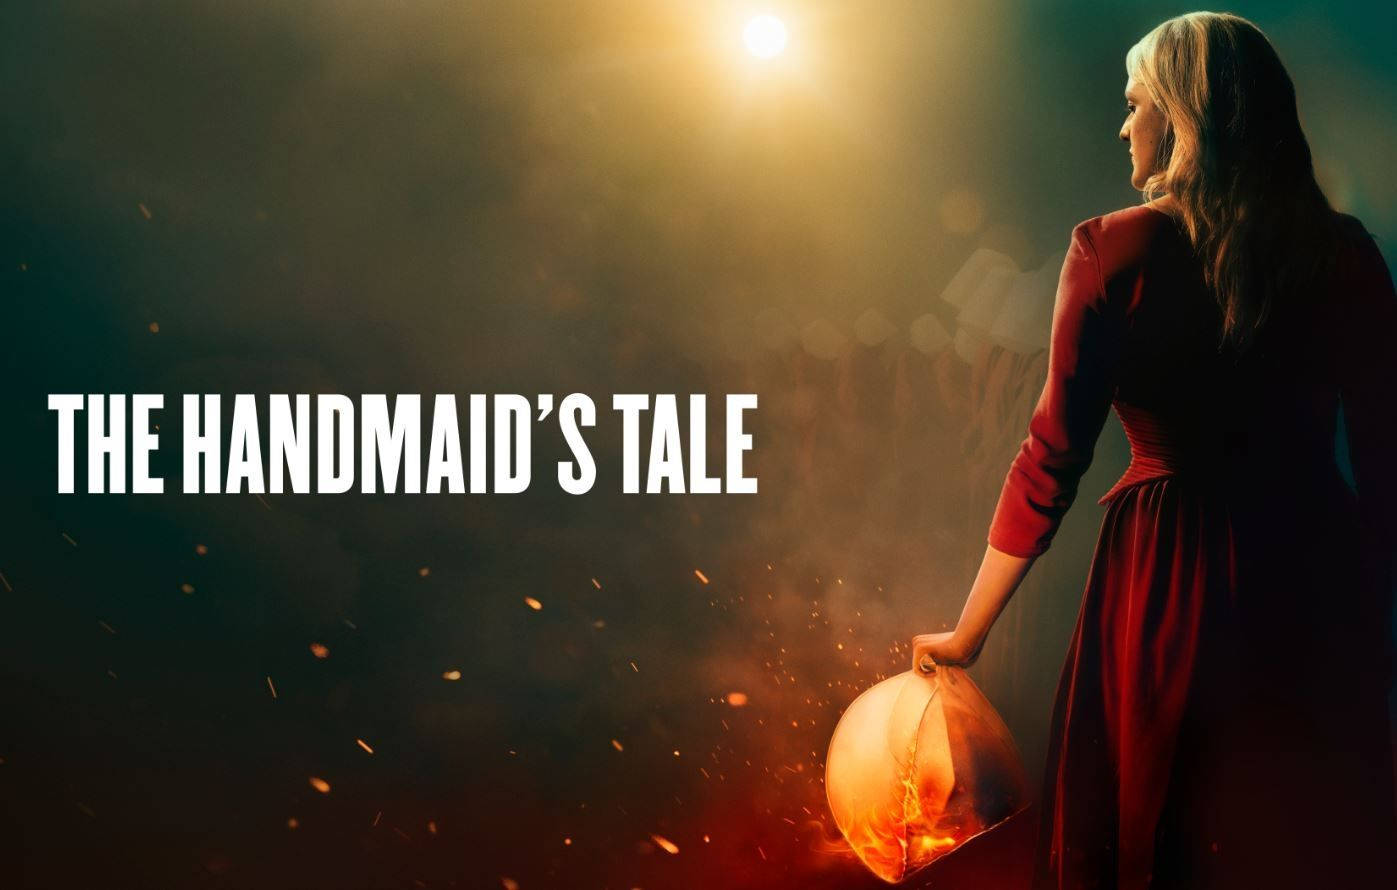 The Handmaid's Tale Television Series Background